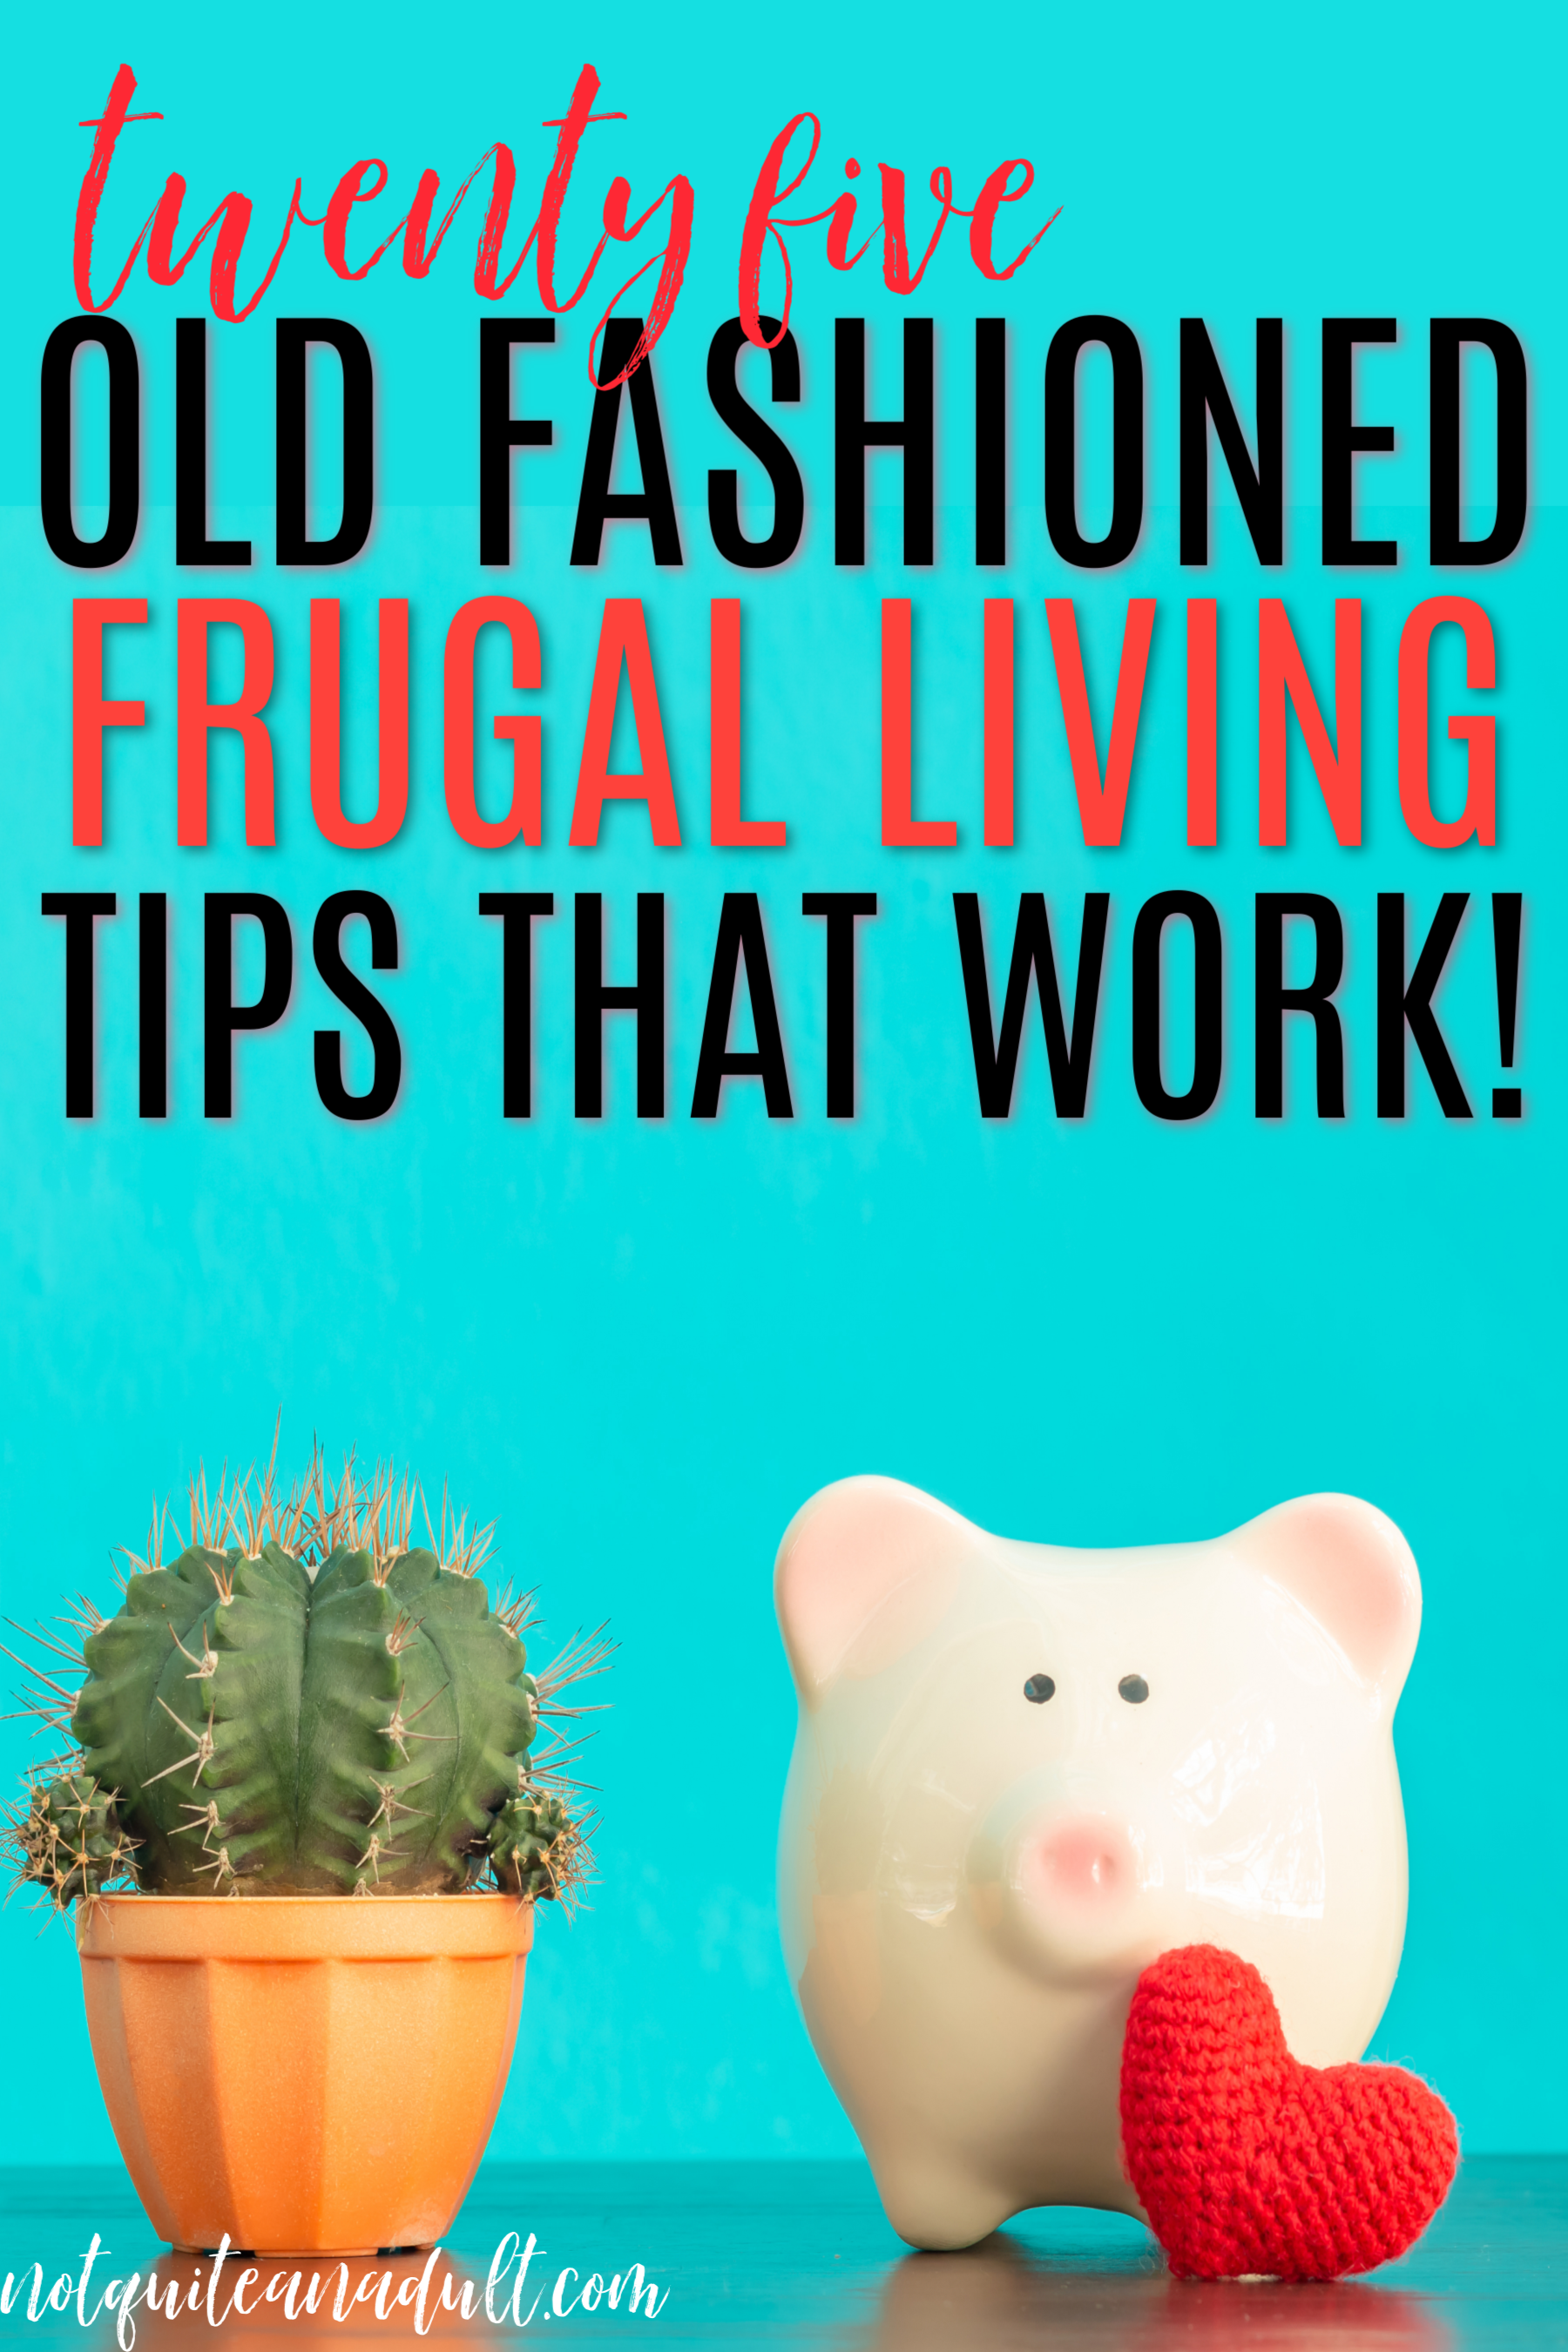 Old Fashioned Frugal Living Tips (that still work!)